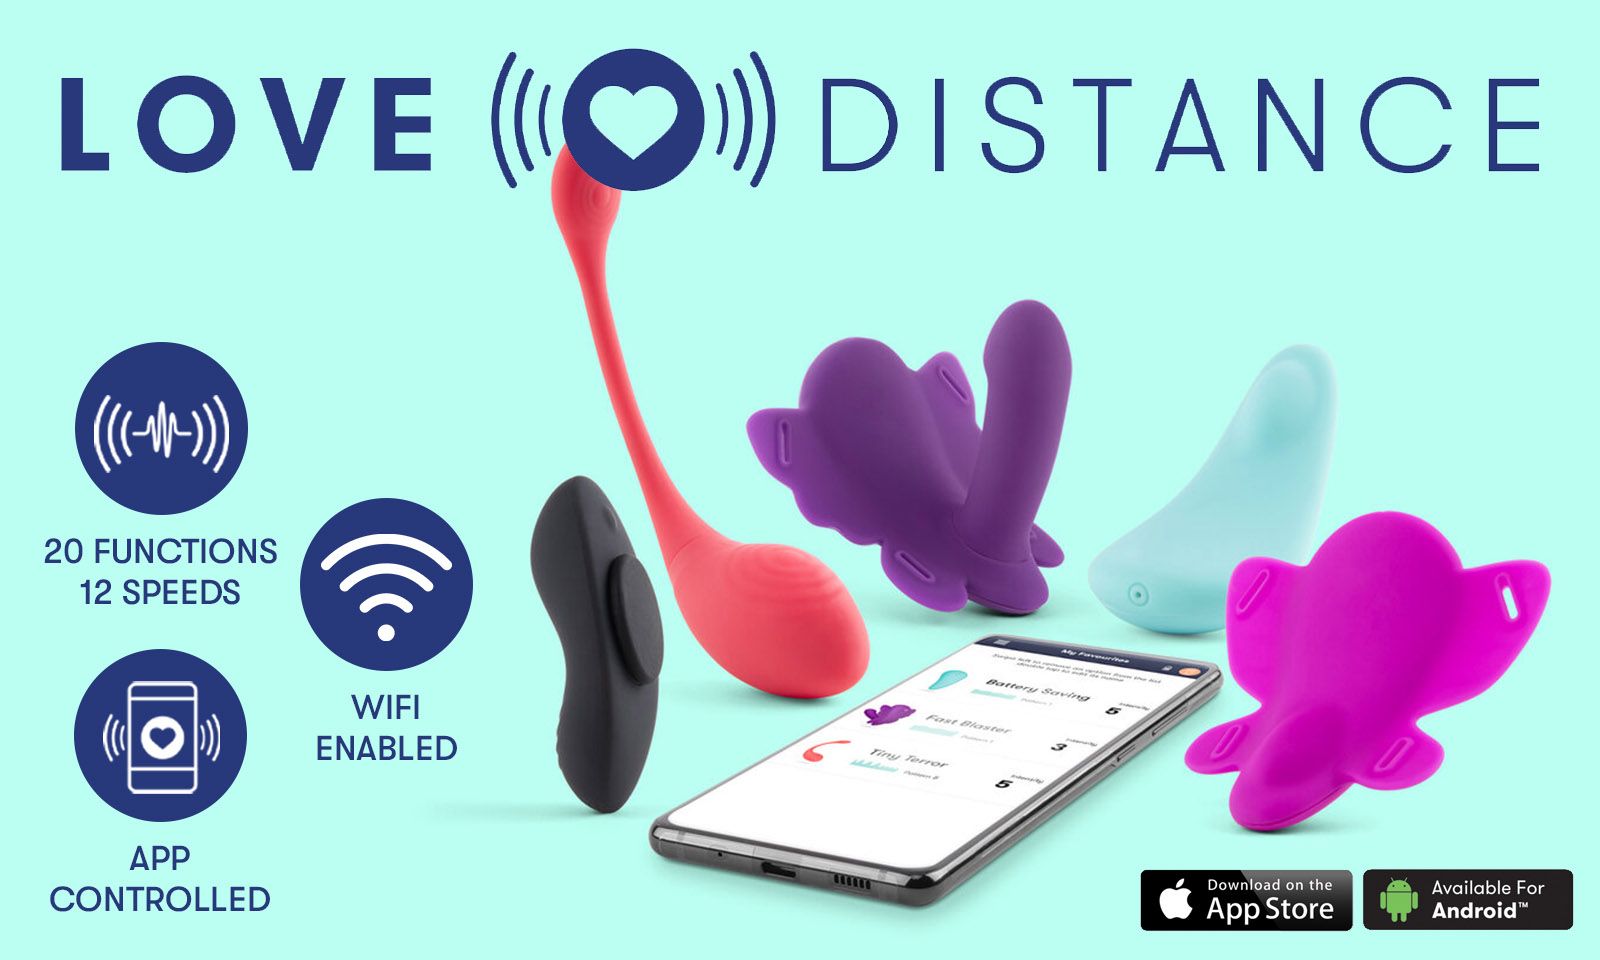 Xgen Products Stocking New Love Distance App-Controlled Toys